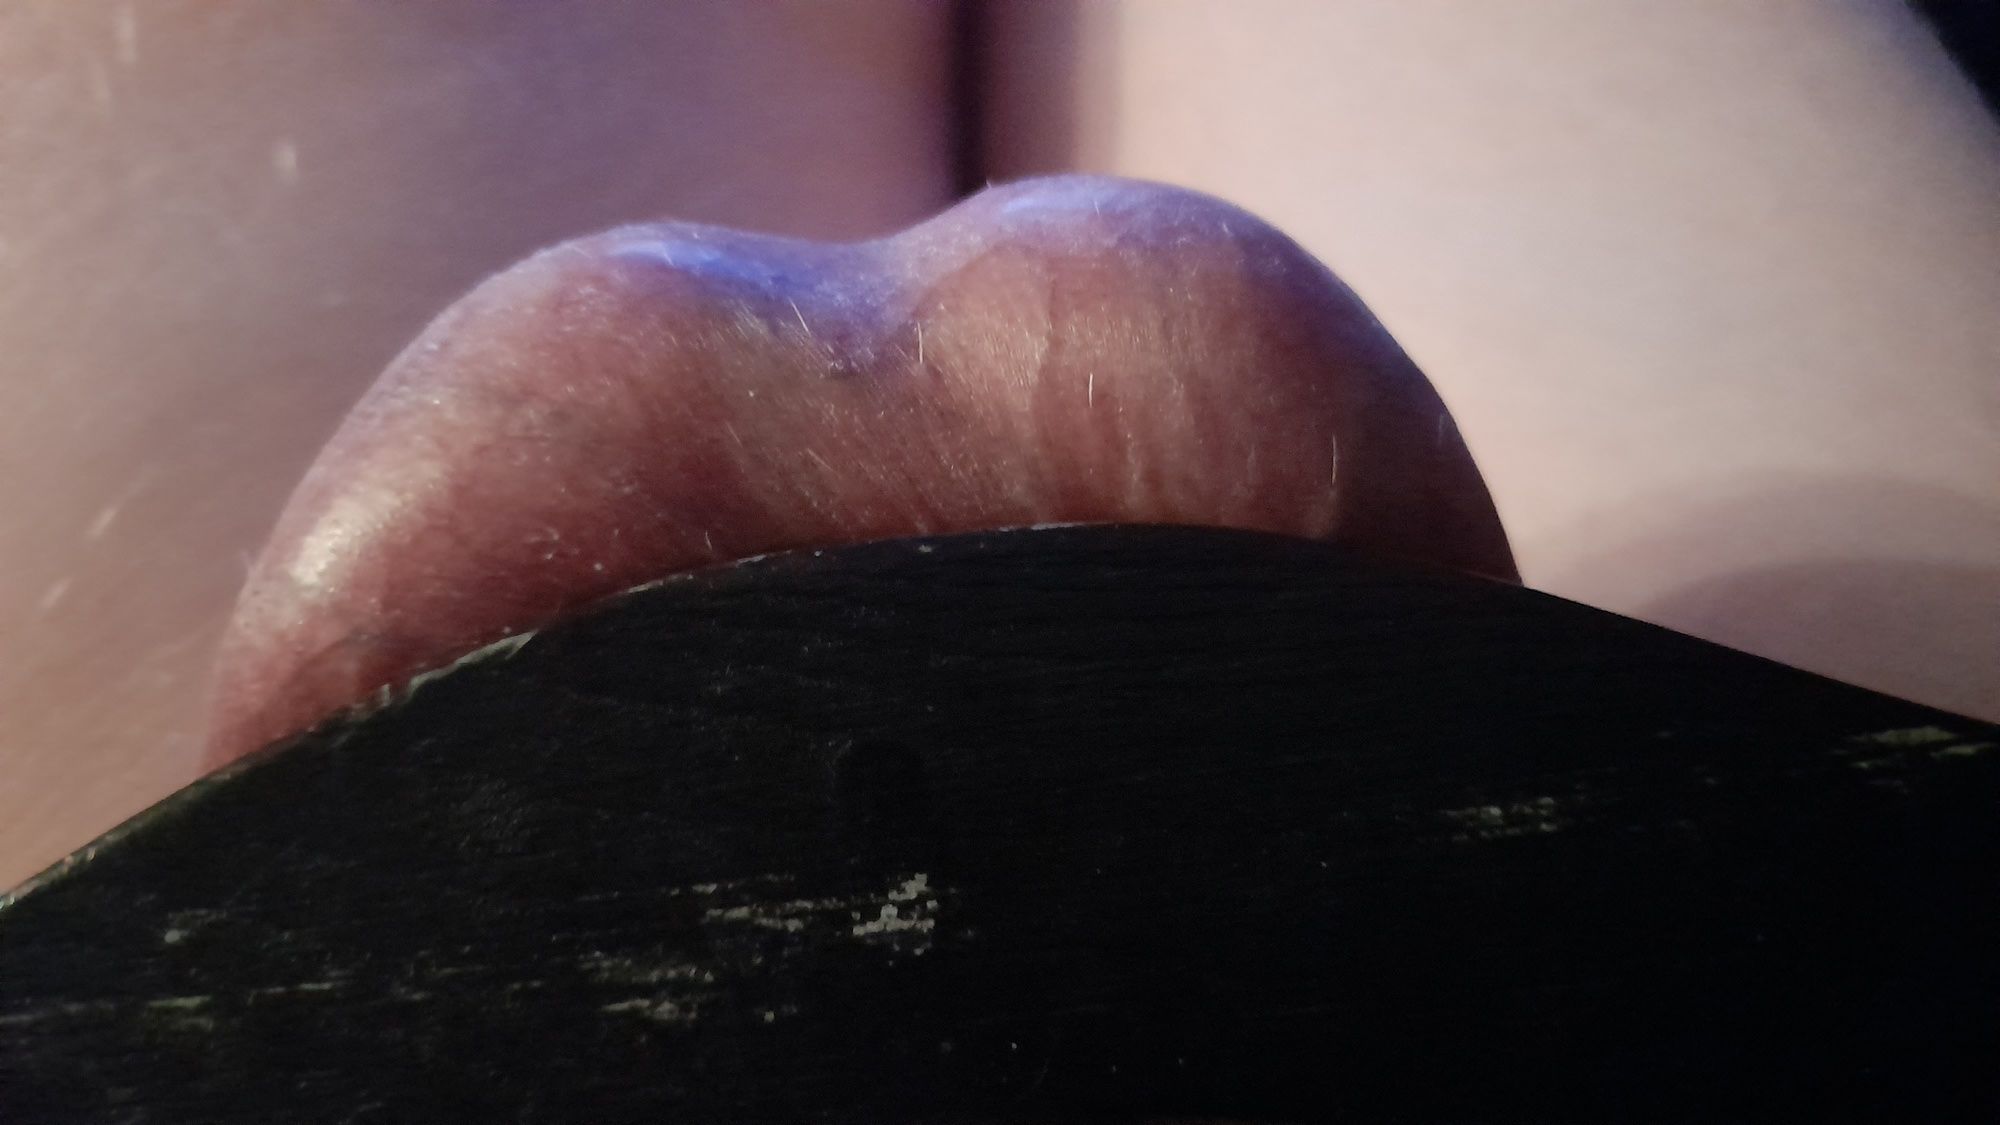 many pics of my cock #25